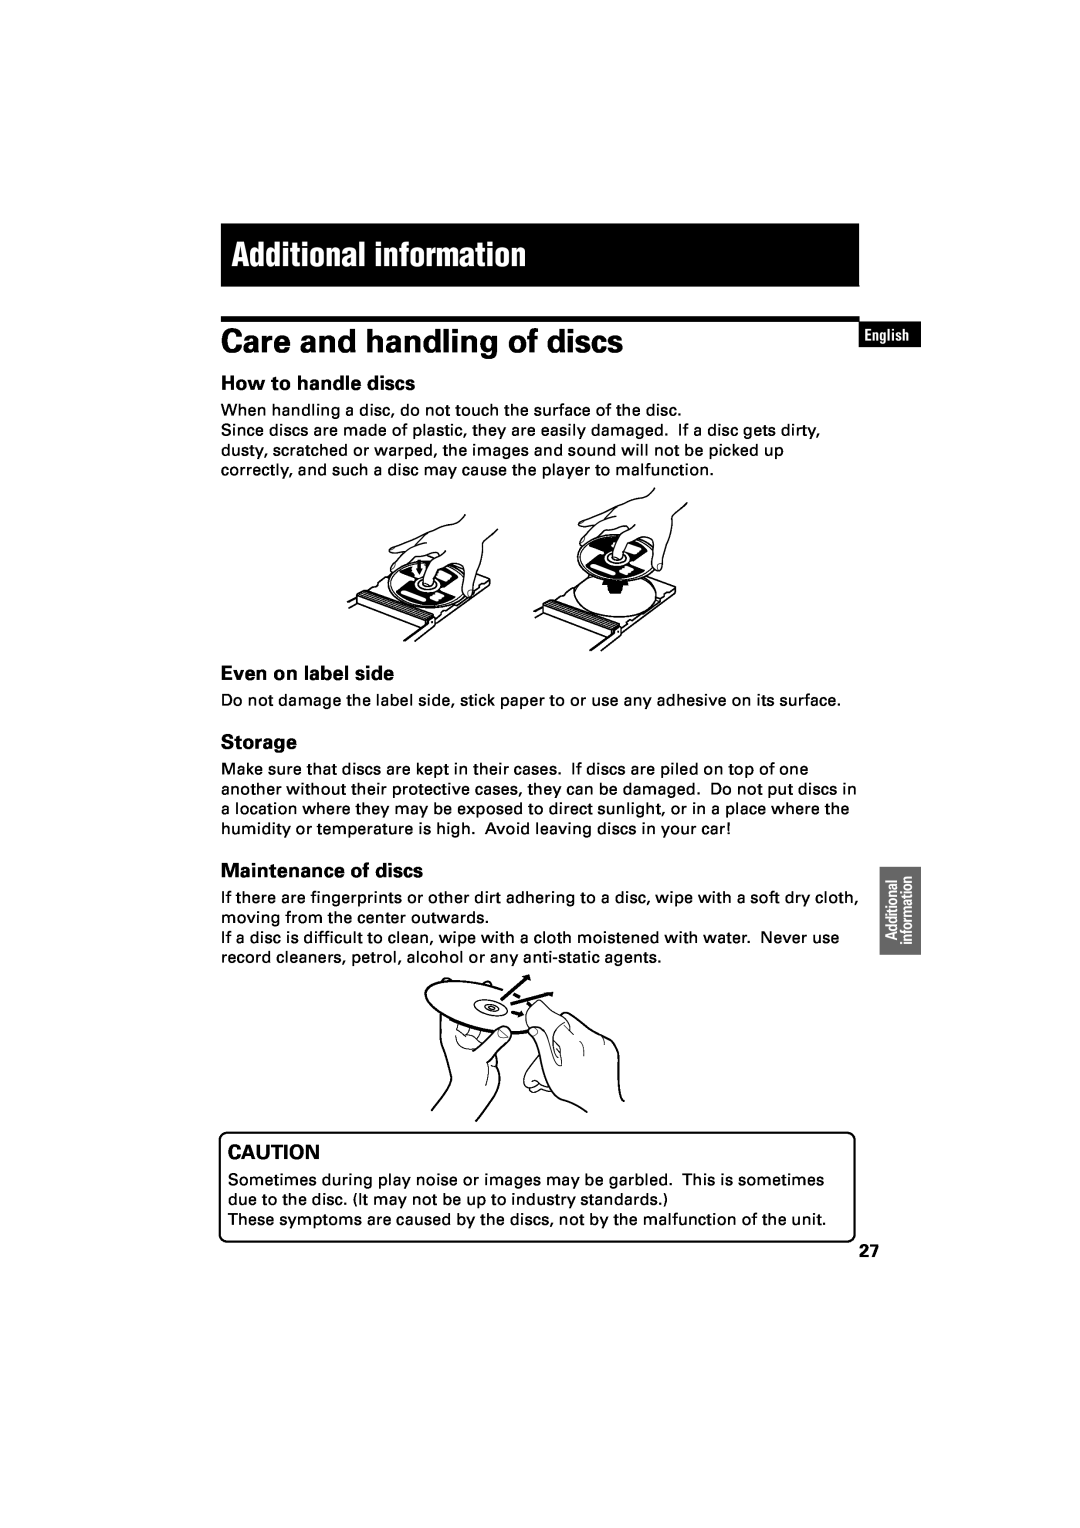 JVC XR-D400SL manual Additional information, Care and handling of discs, How to handle discs, Even on label side, Storage 